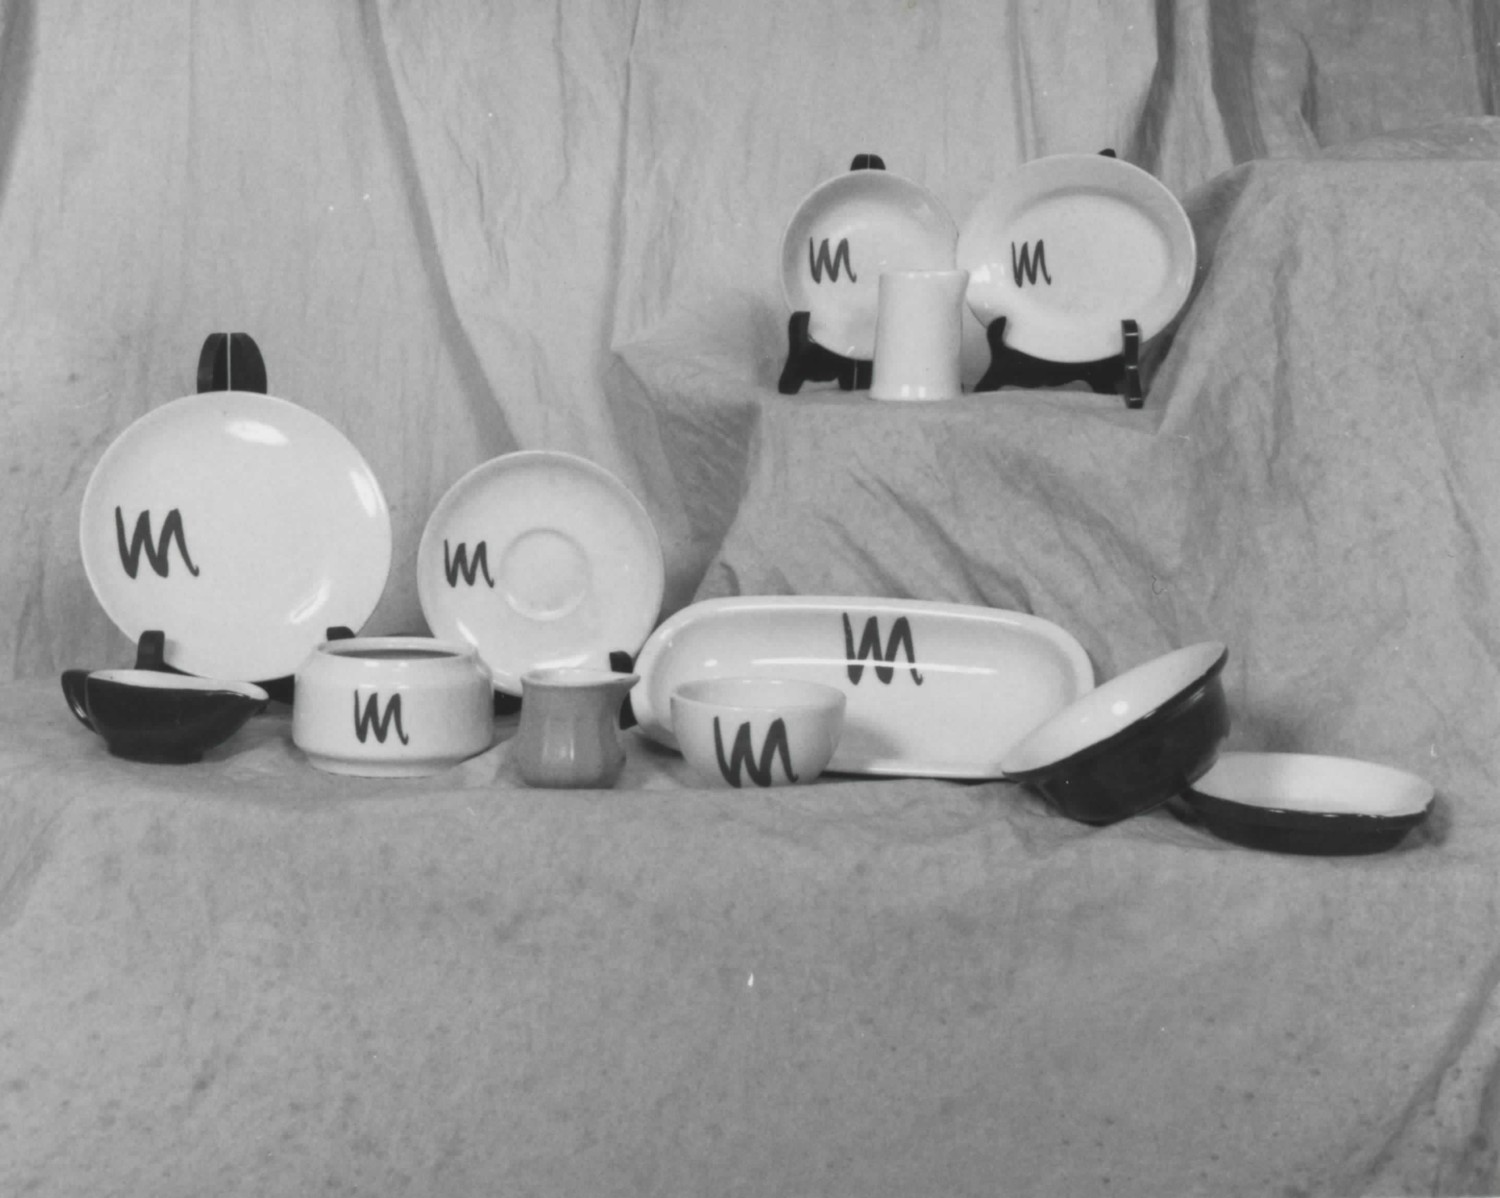 Marting Hotel, Ironton Ohio China/stoneware from the Marting Hotel (date unknown) (1998)